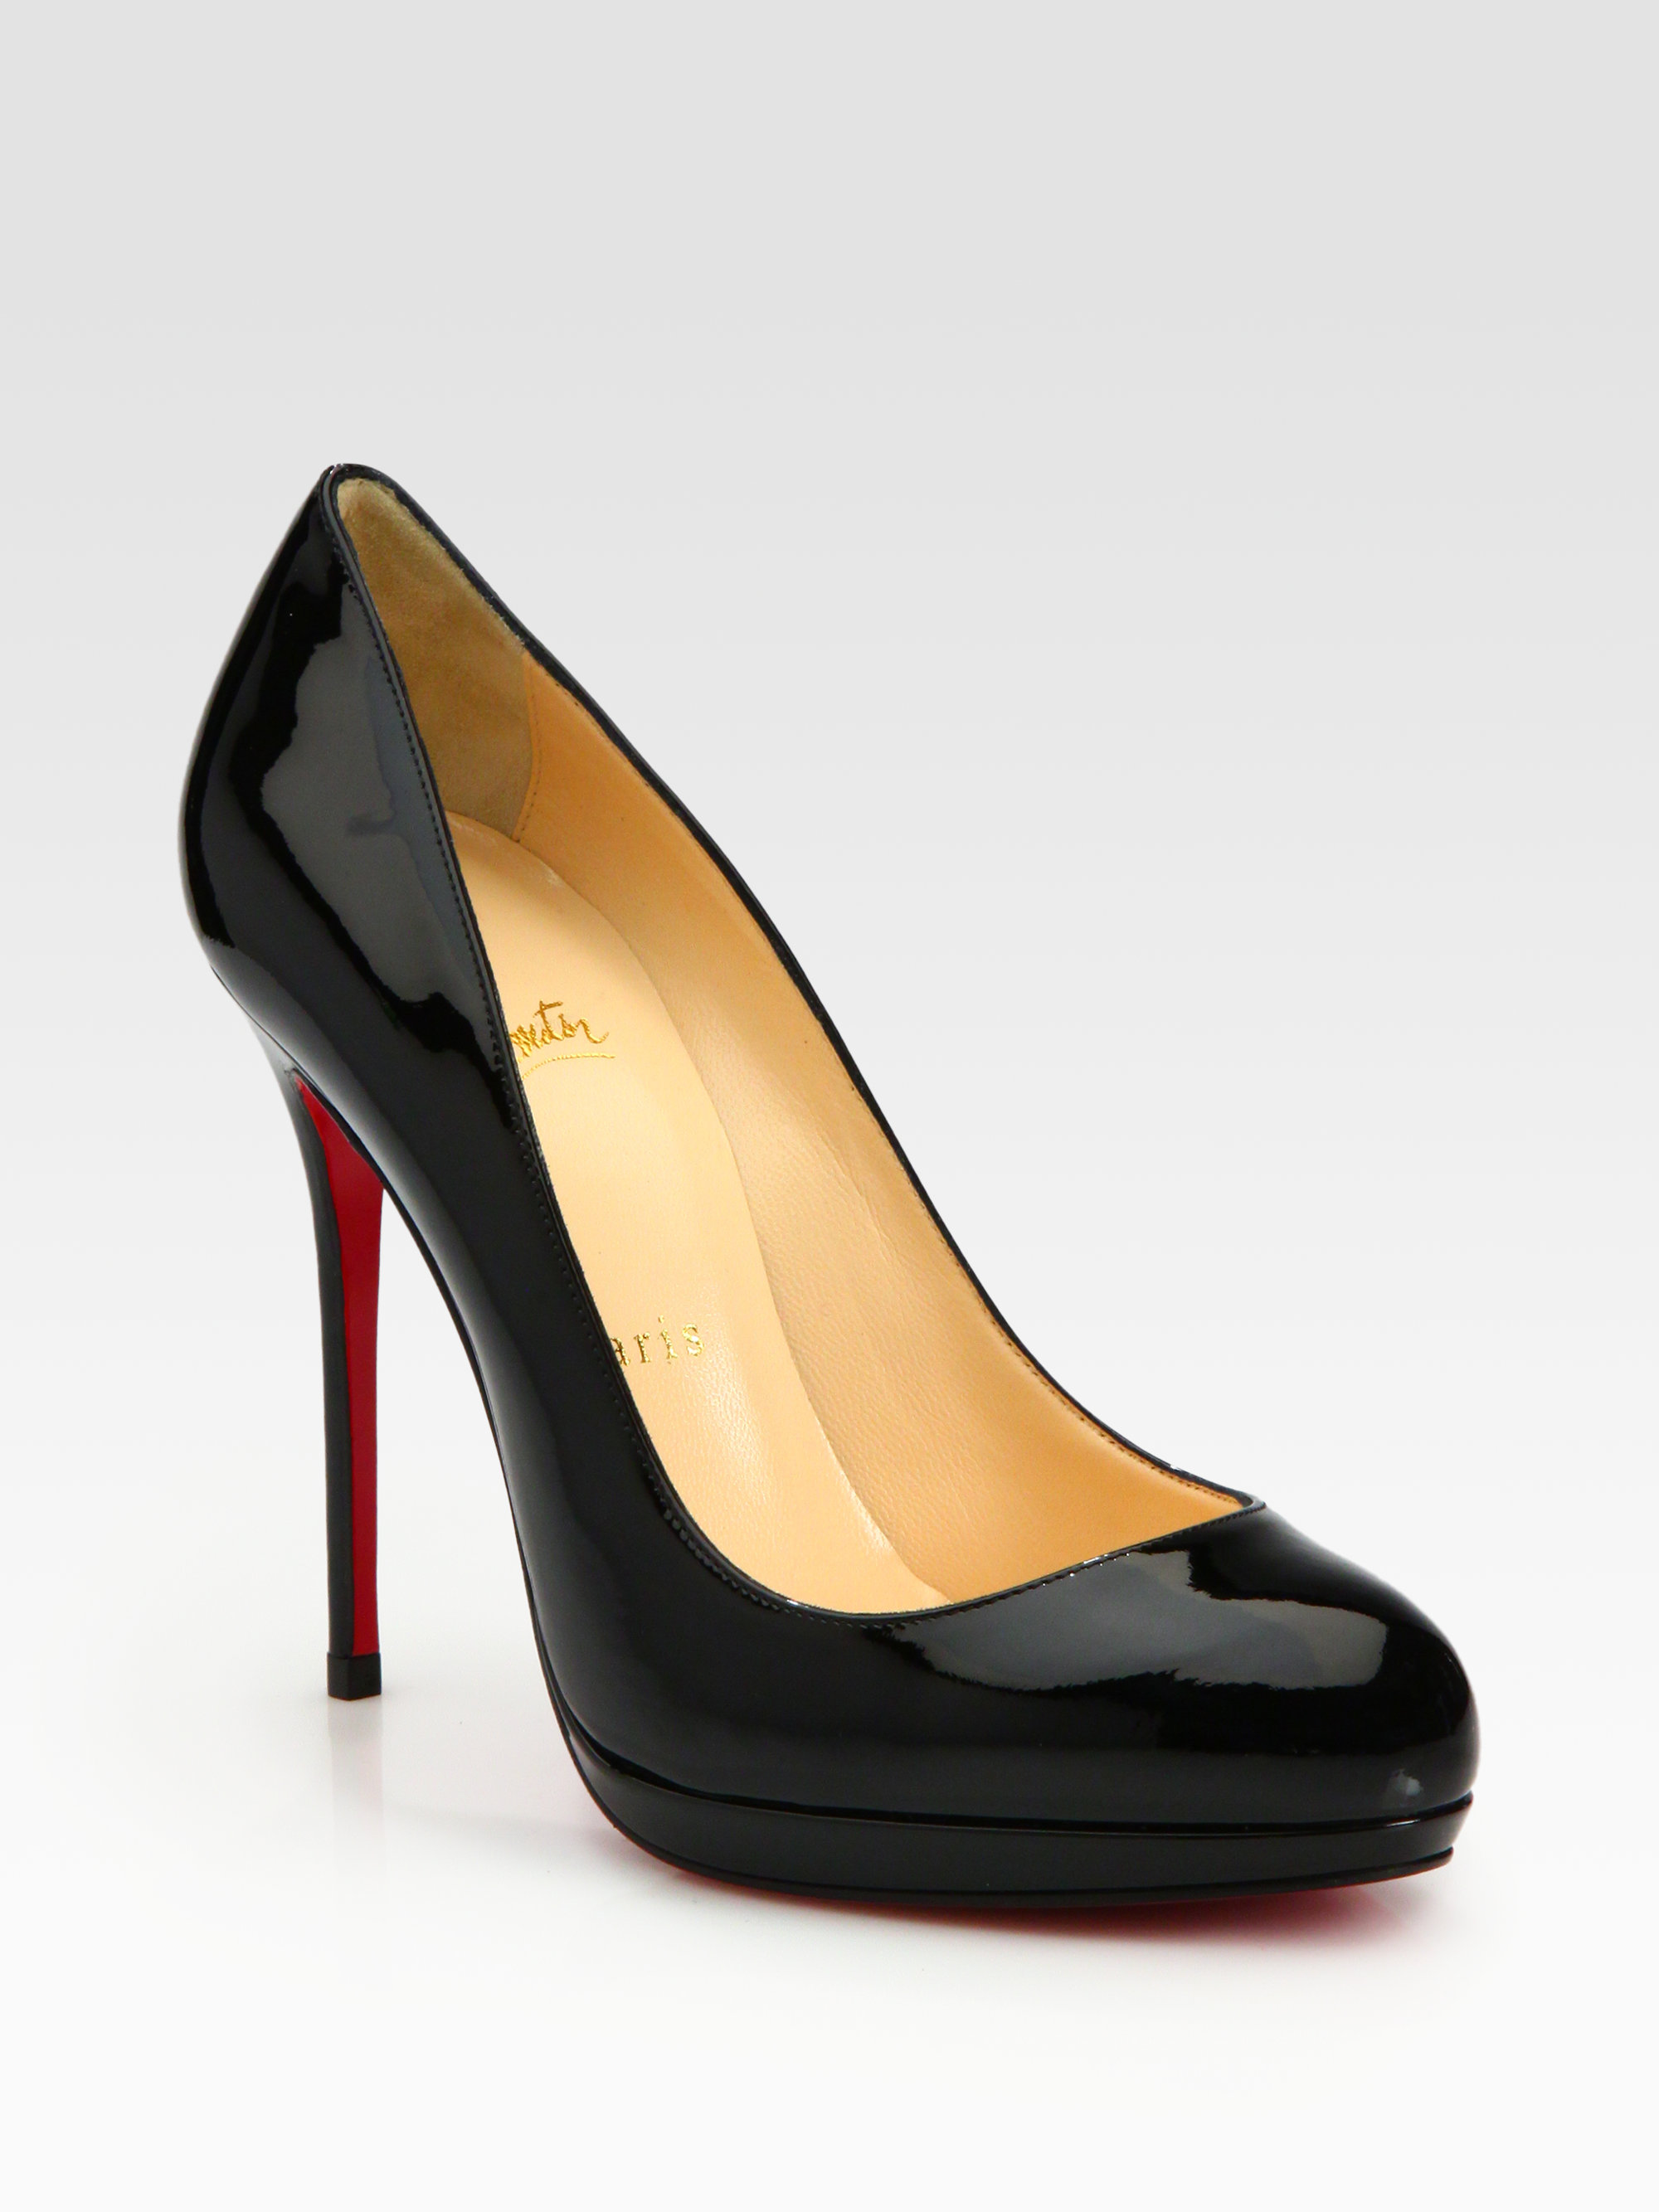 Lyst - Christian louboutin Patent Leather Platform Pumps in Black